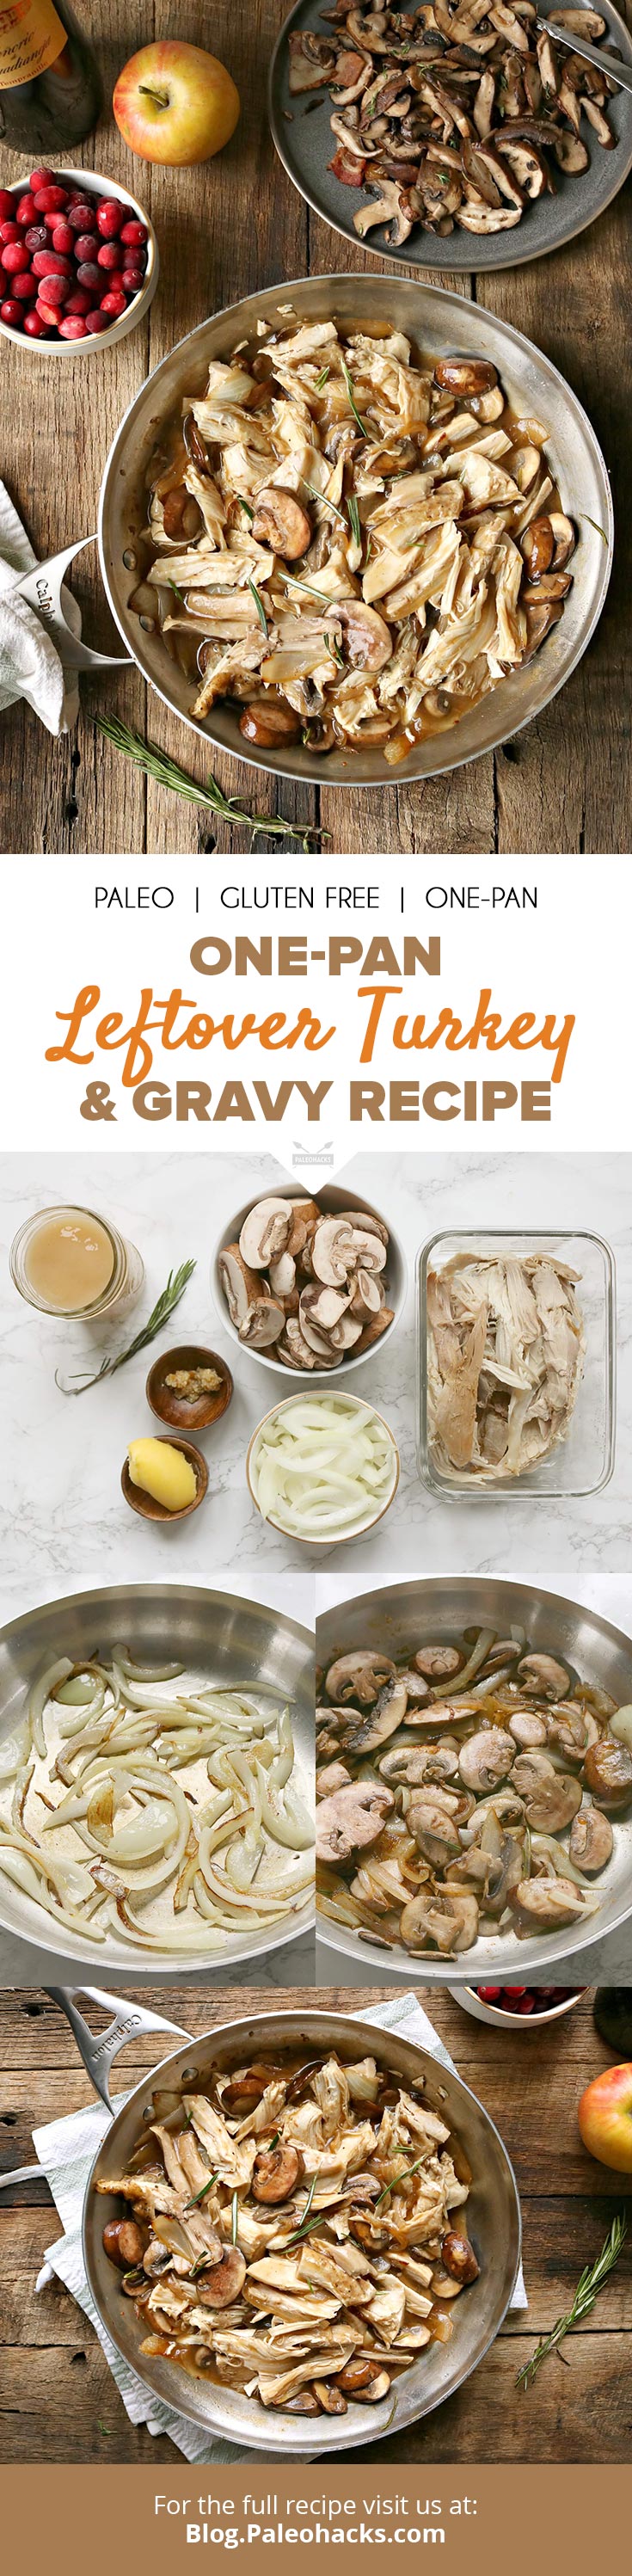 If you’re looking for a light way to use up those hefty Thanksgiving leftovers, shred up the turkey and try this recipe full of veggies smothered in gravy.